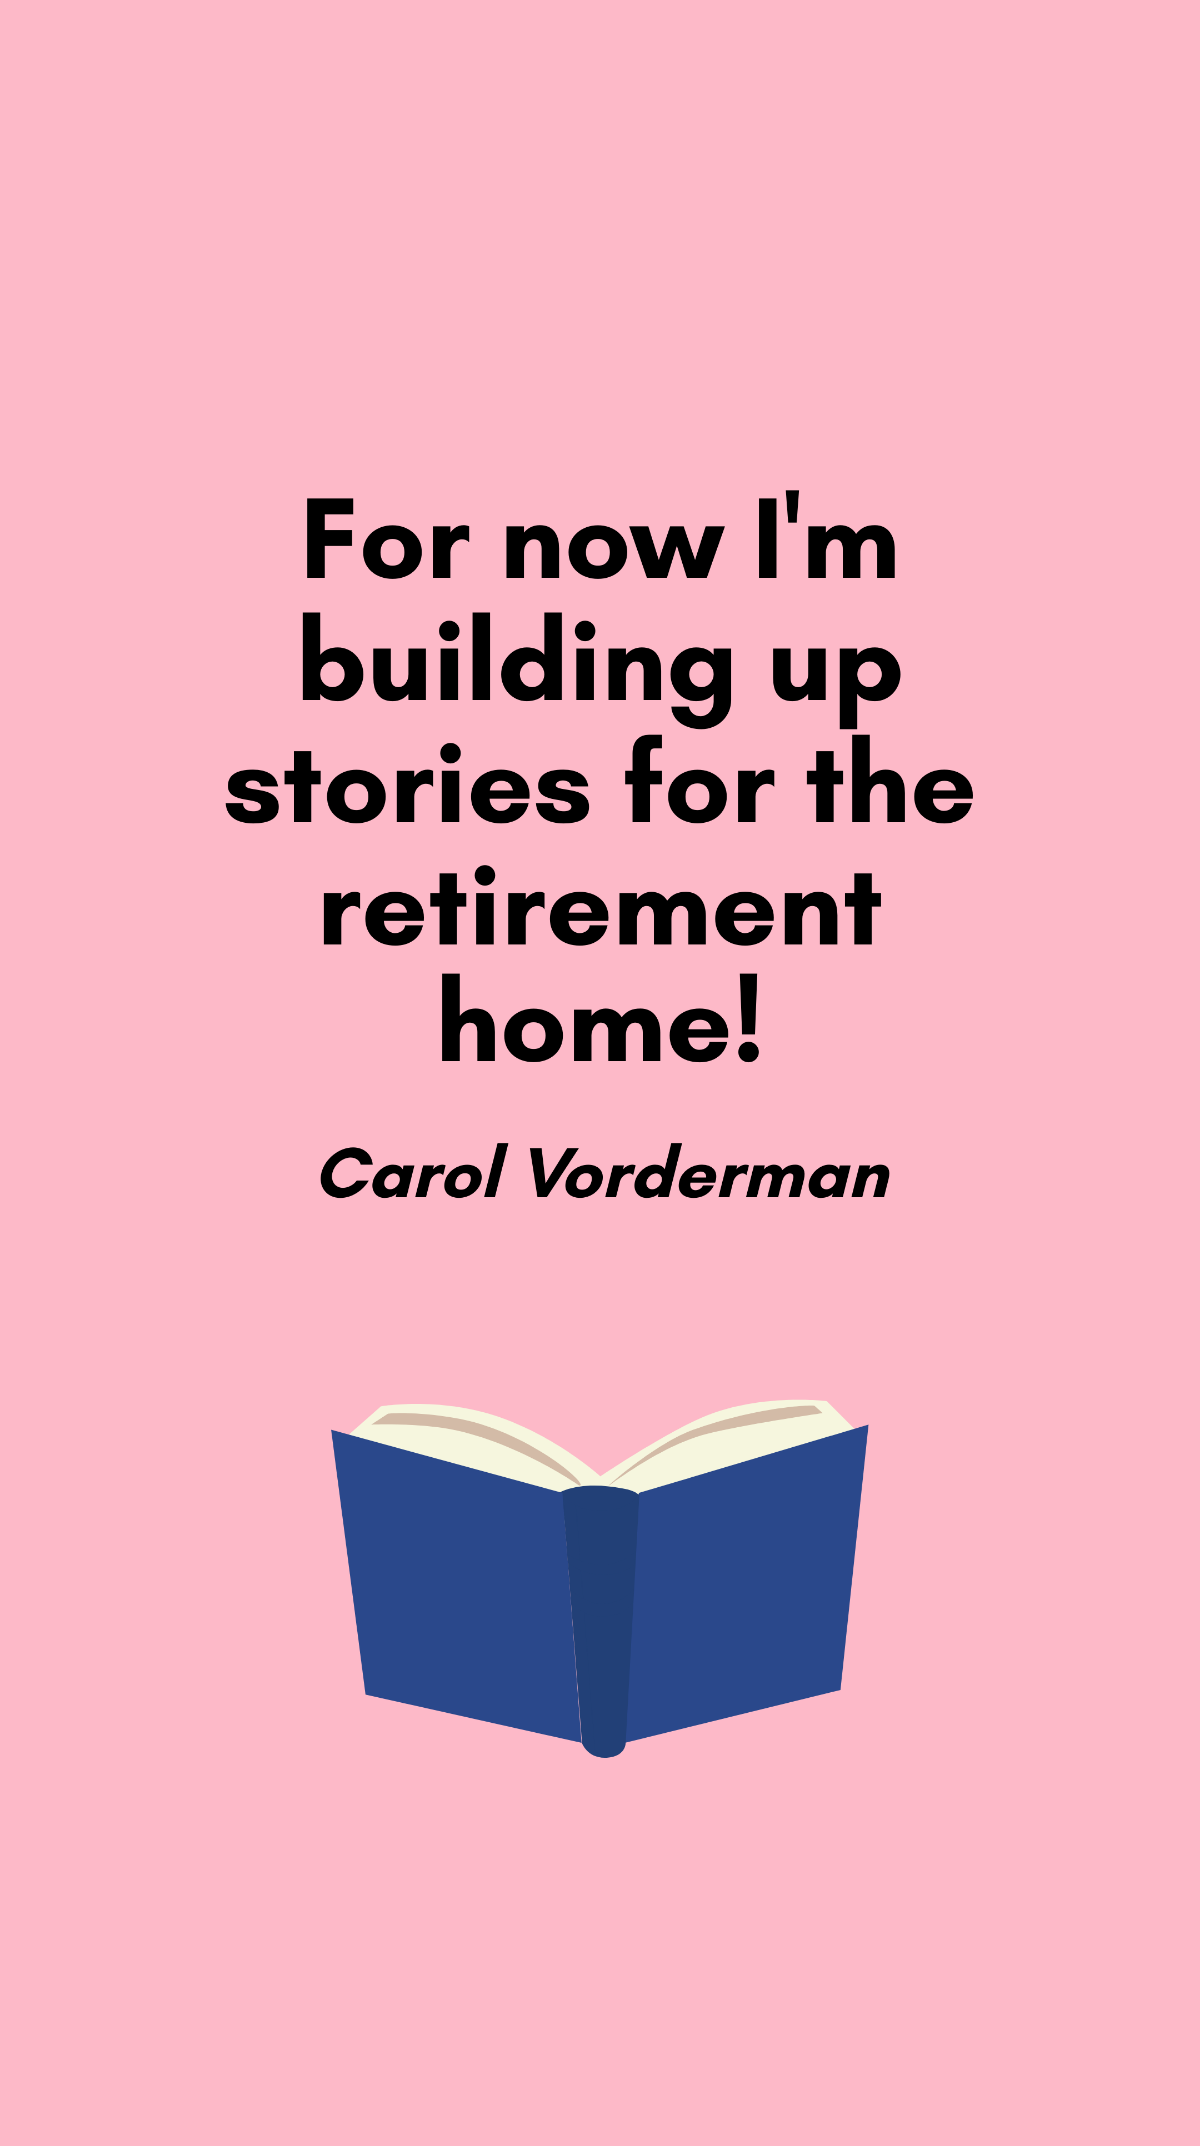 Carol Vorderman - For now I'm building up stories for the retirement home!